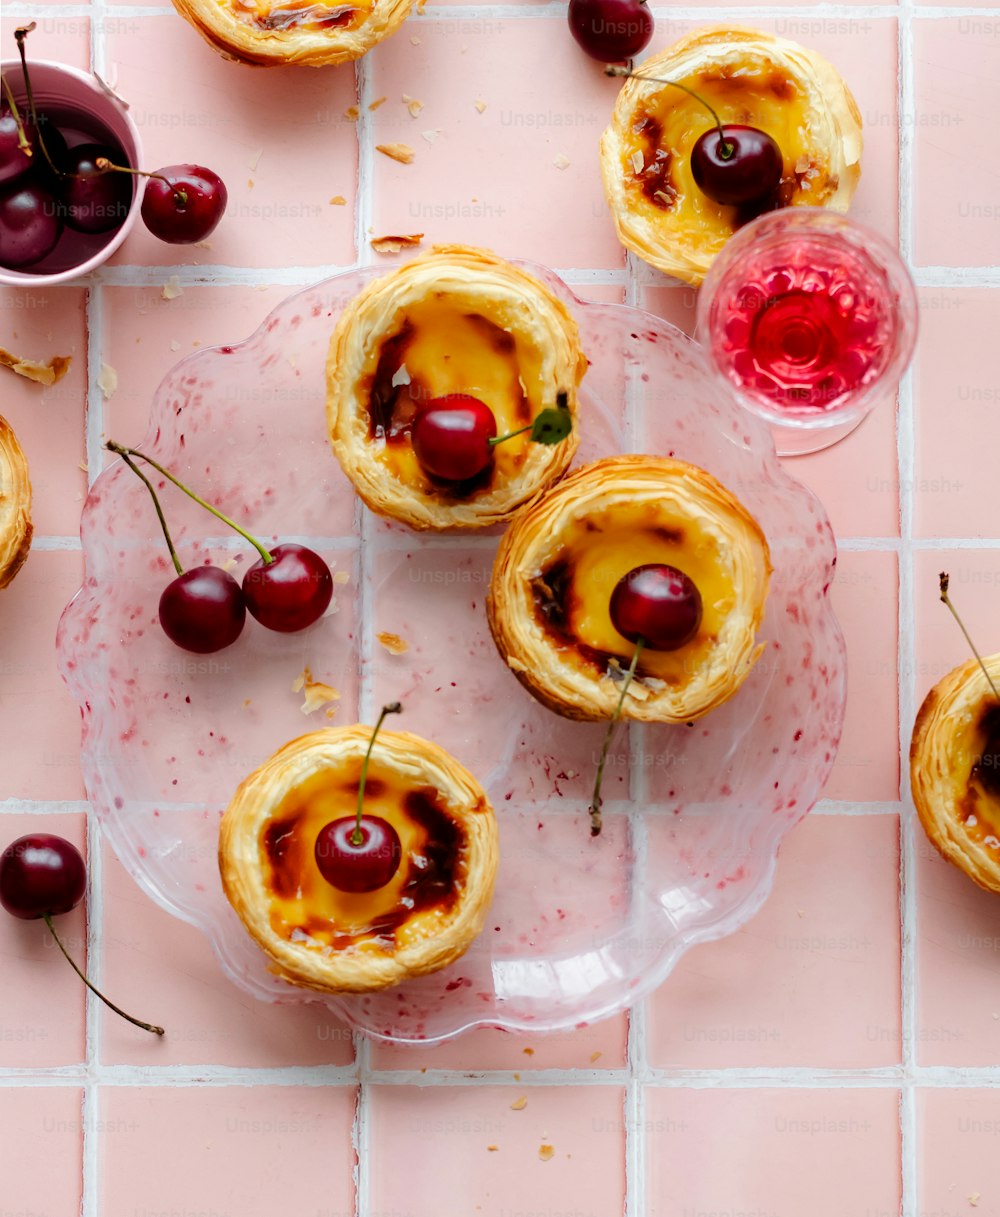 a plate of pastries with cherries on them